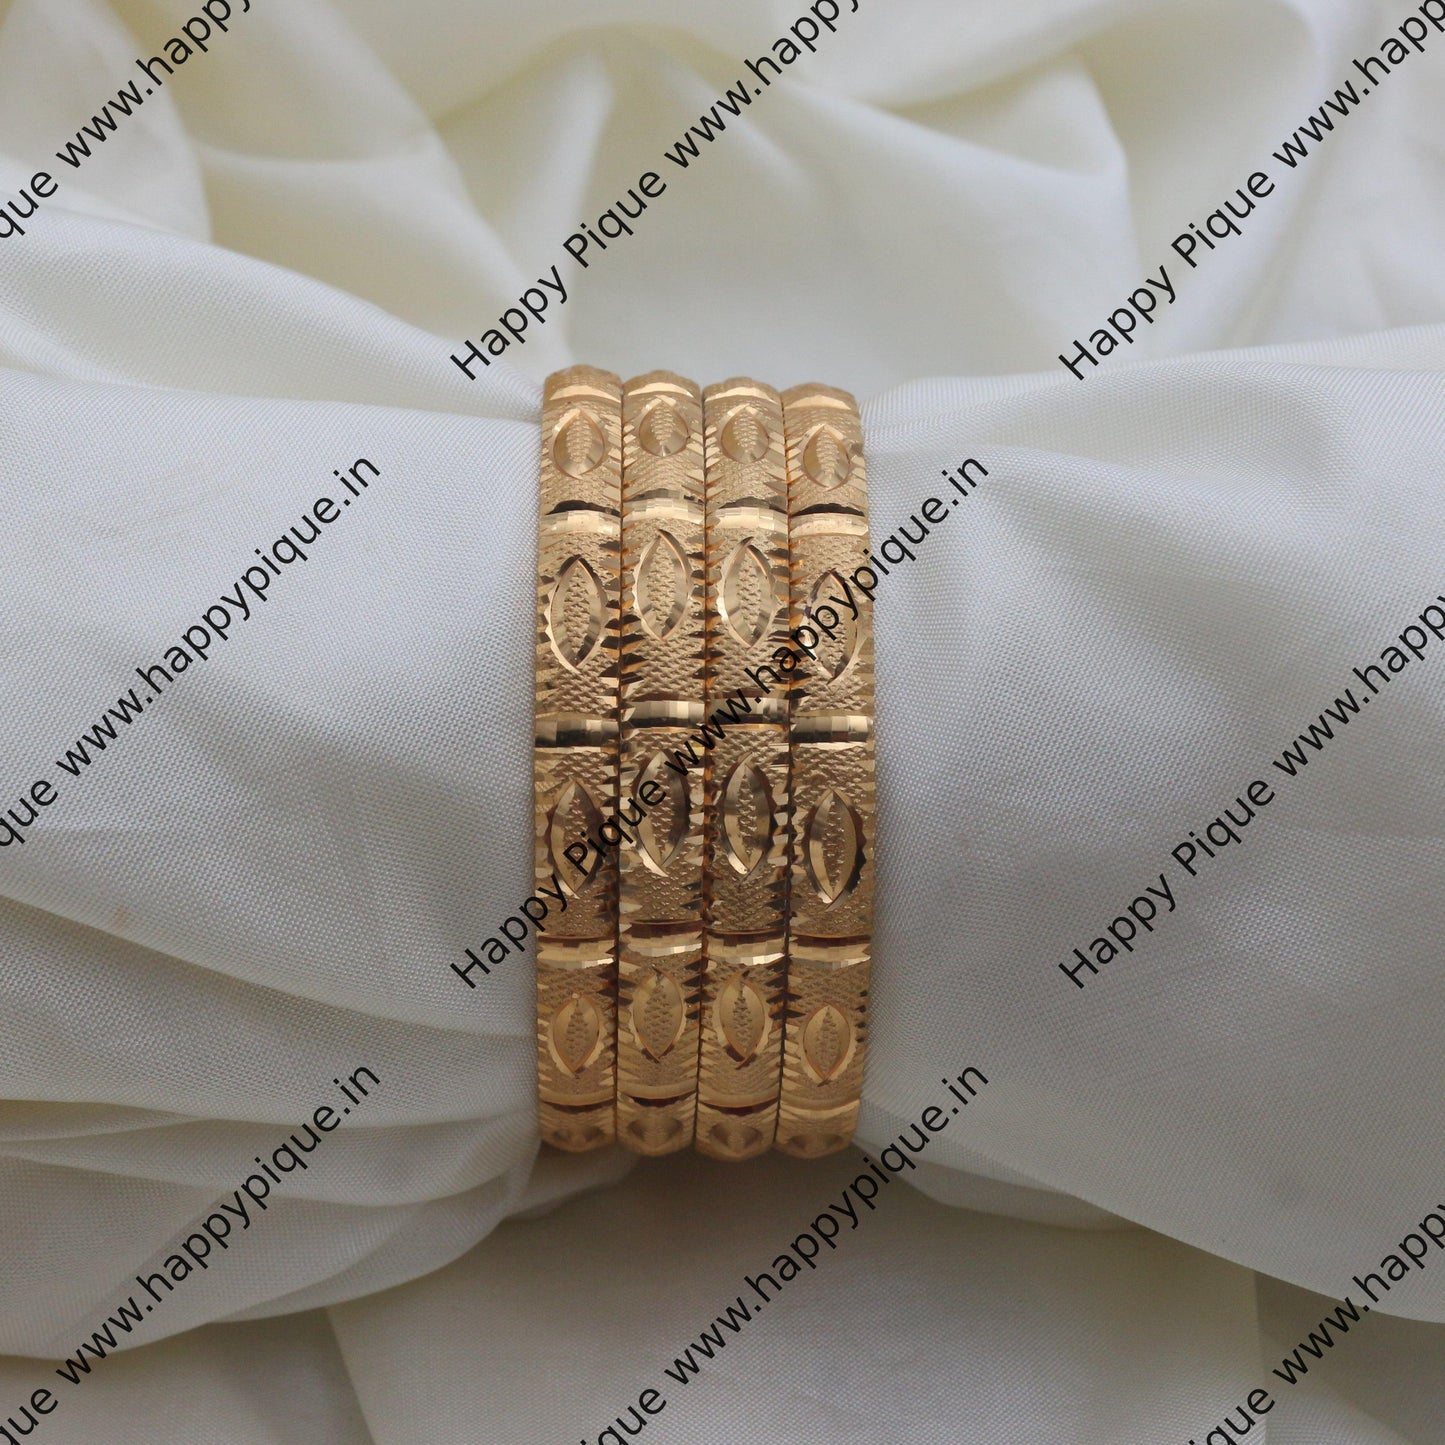 Real Gold Tone Set of 4 Bangles - SS033 - Daily Wear/Office Wear/Function Wear Bangles